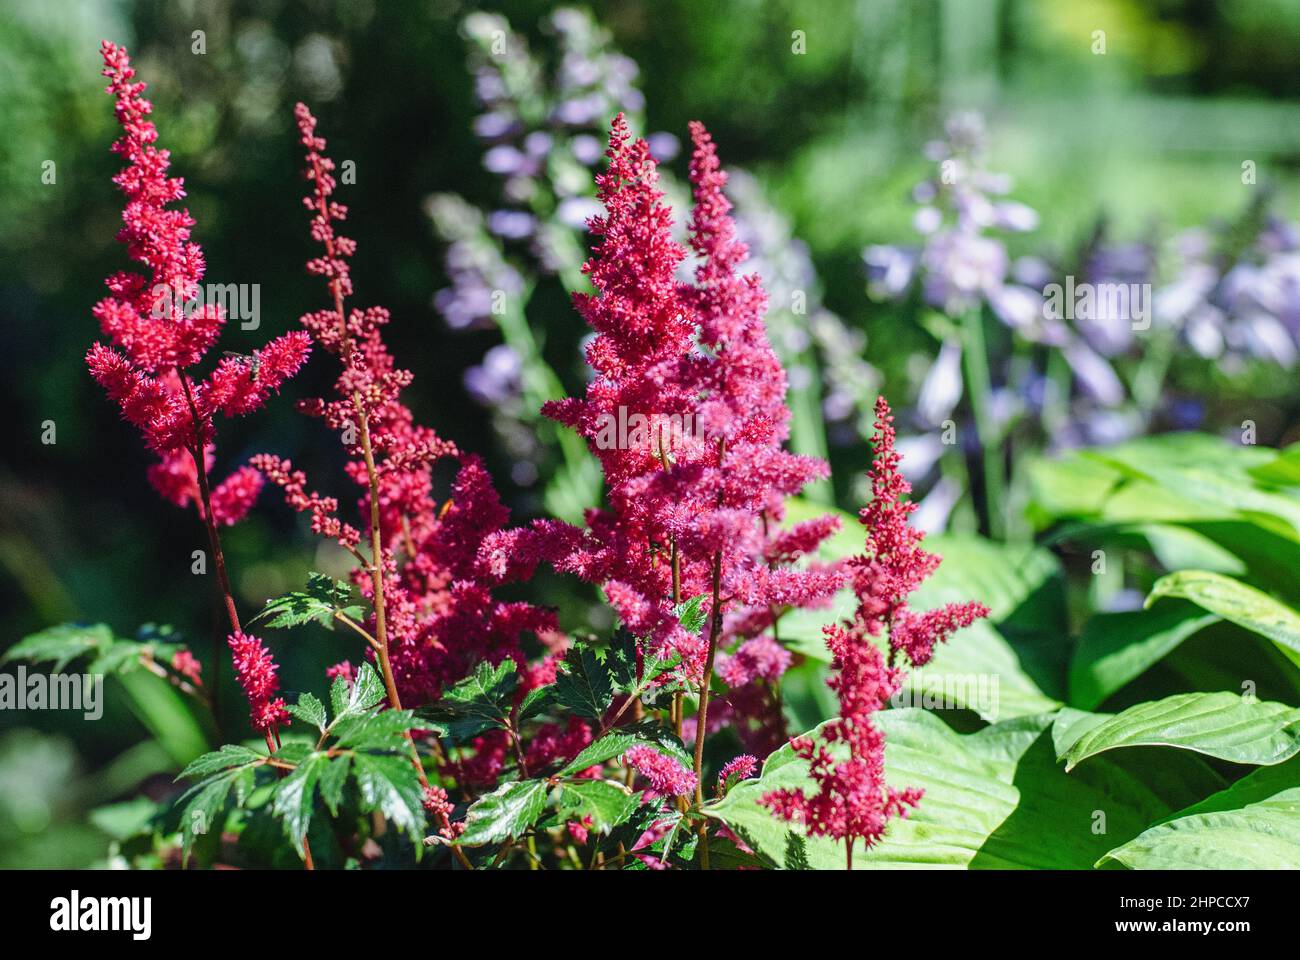 Japanese astilbe flowering with red panicled inflorescences in sunny summer garden Stock Photo